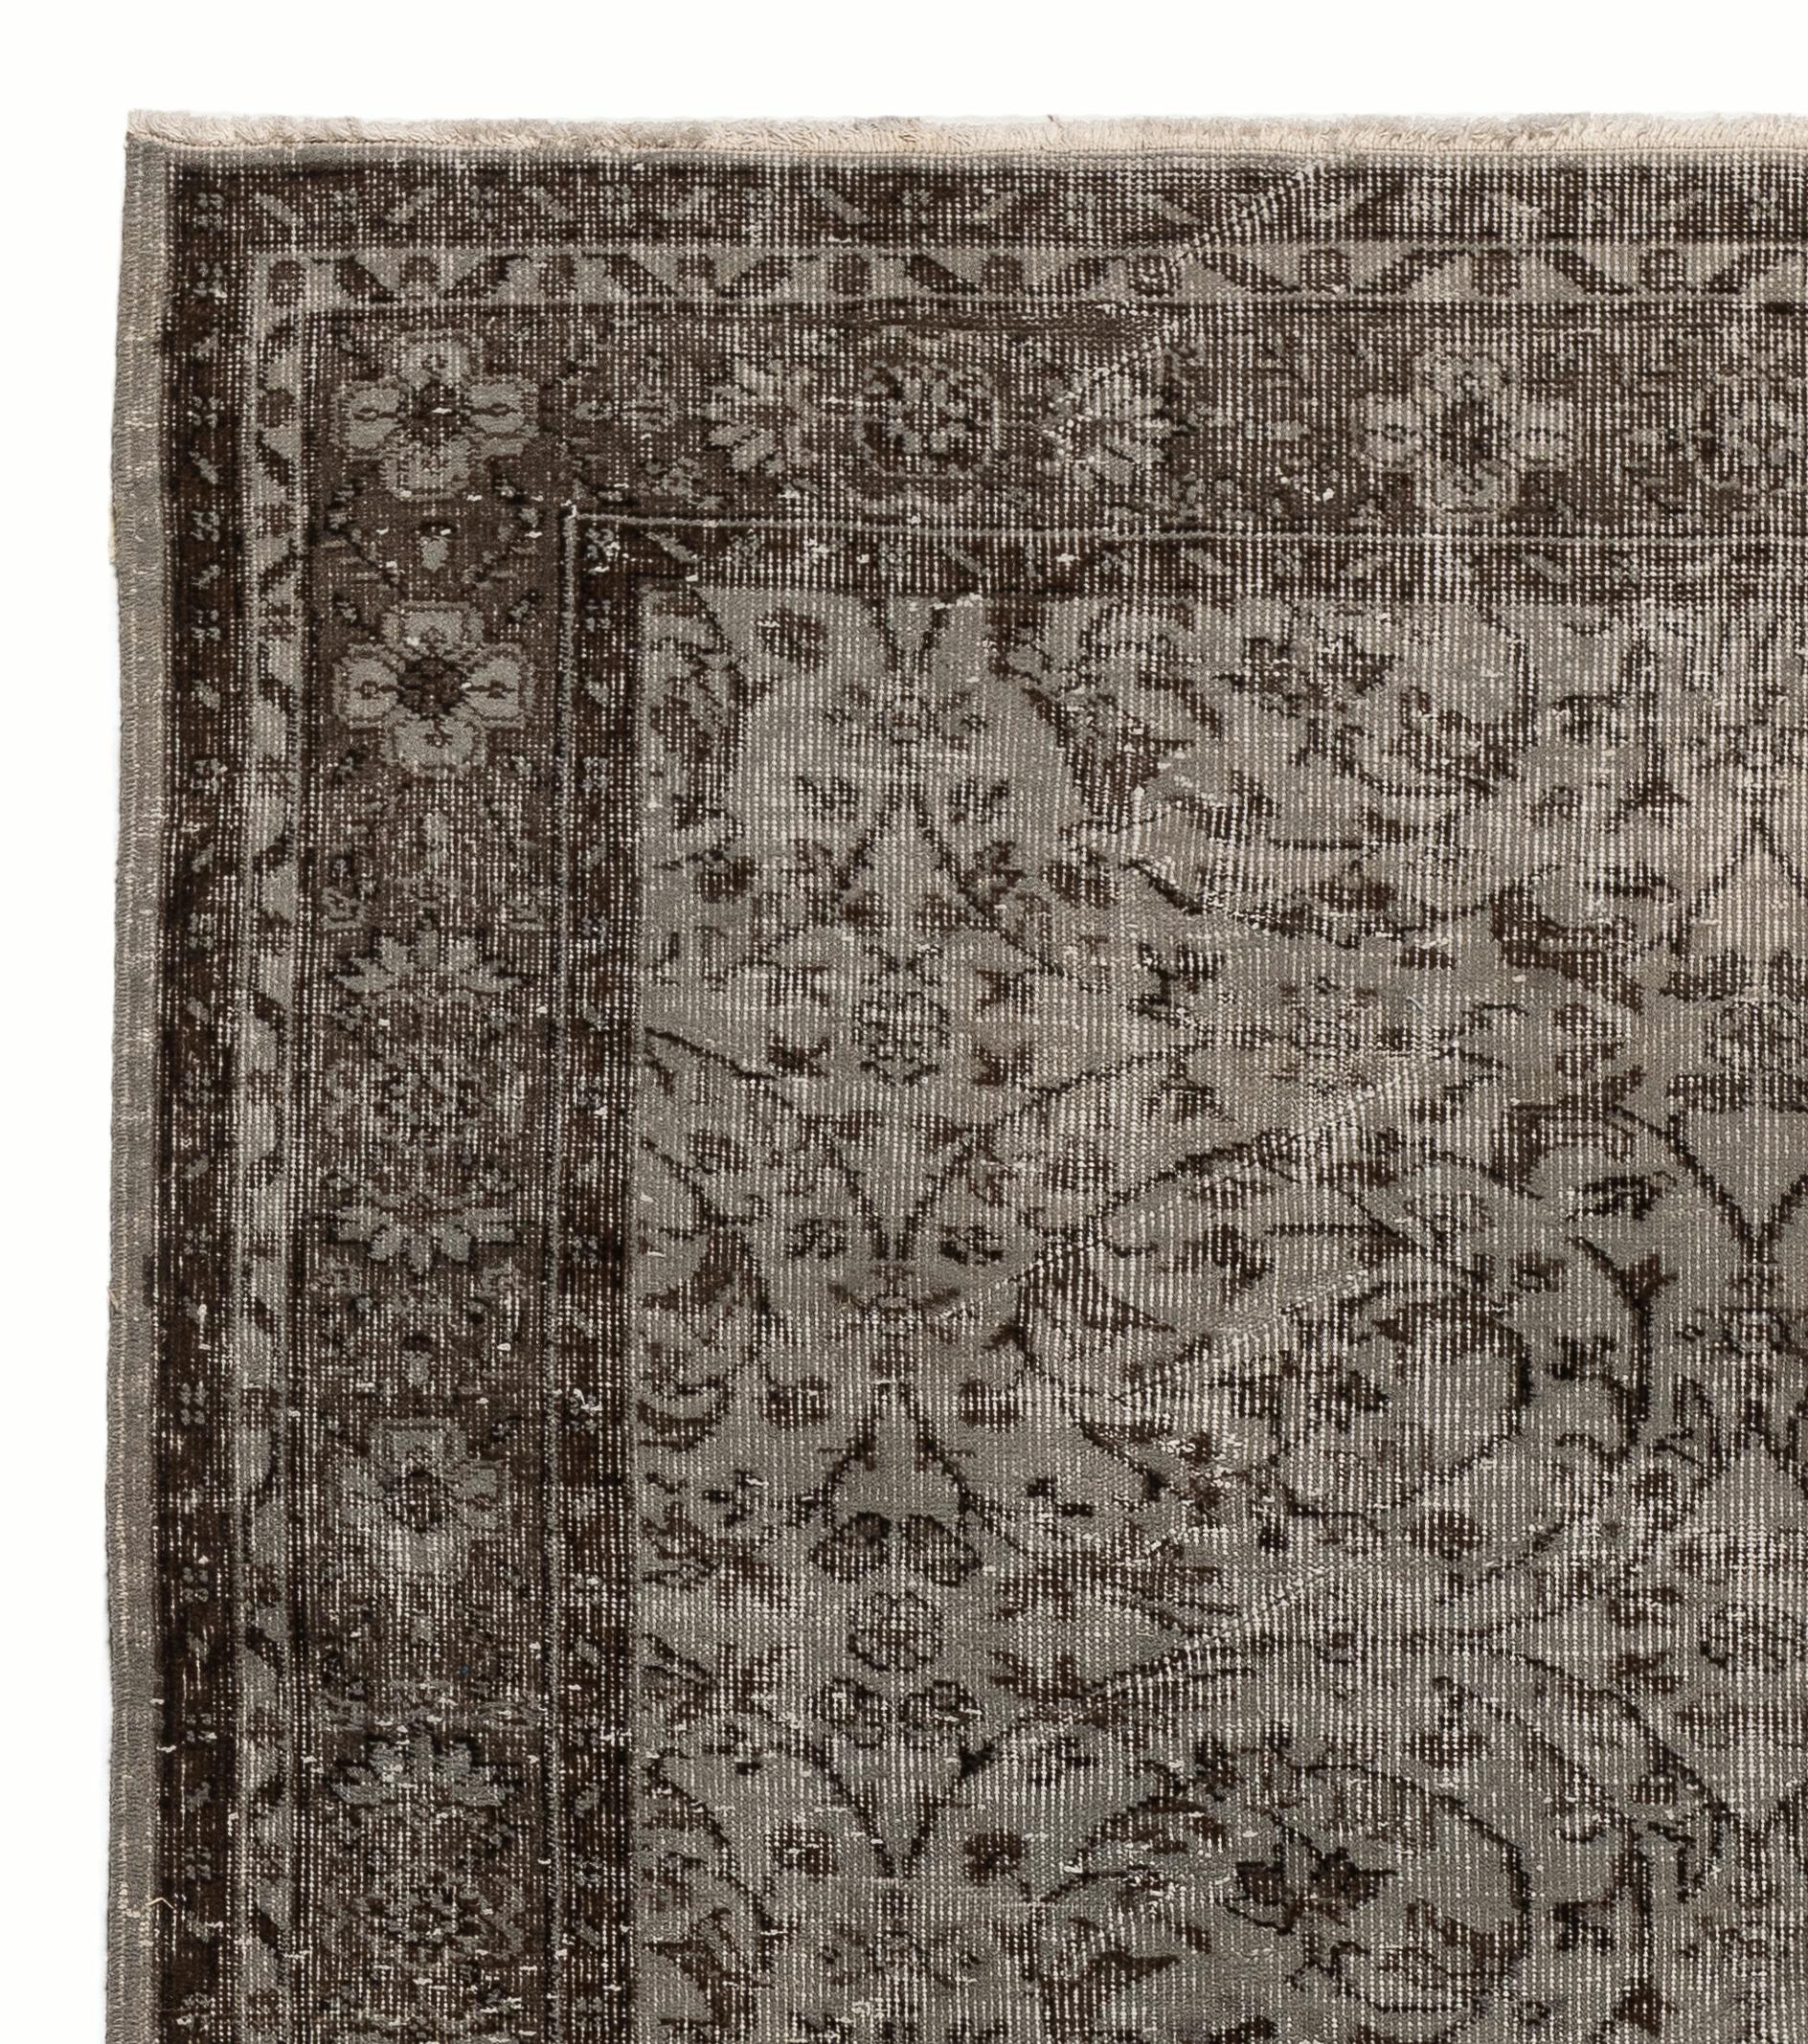 A vintage Turkish area rug re-dyed in gray color for contemporary interiors.
Finely hand knotted, low wool pile on cotton foundation. Professionally washed.
Sturdy and can be used on a high traffic area, suitable for both residential and